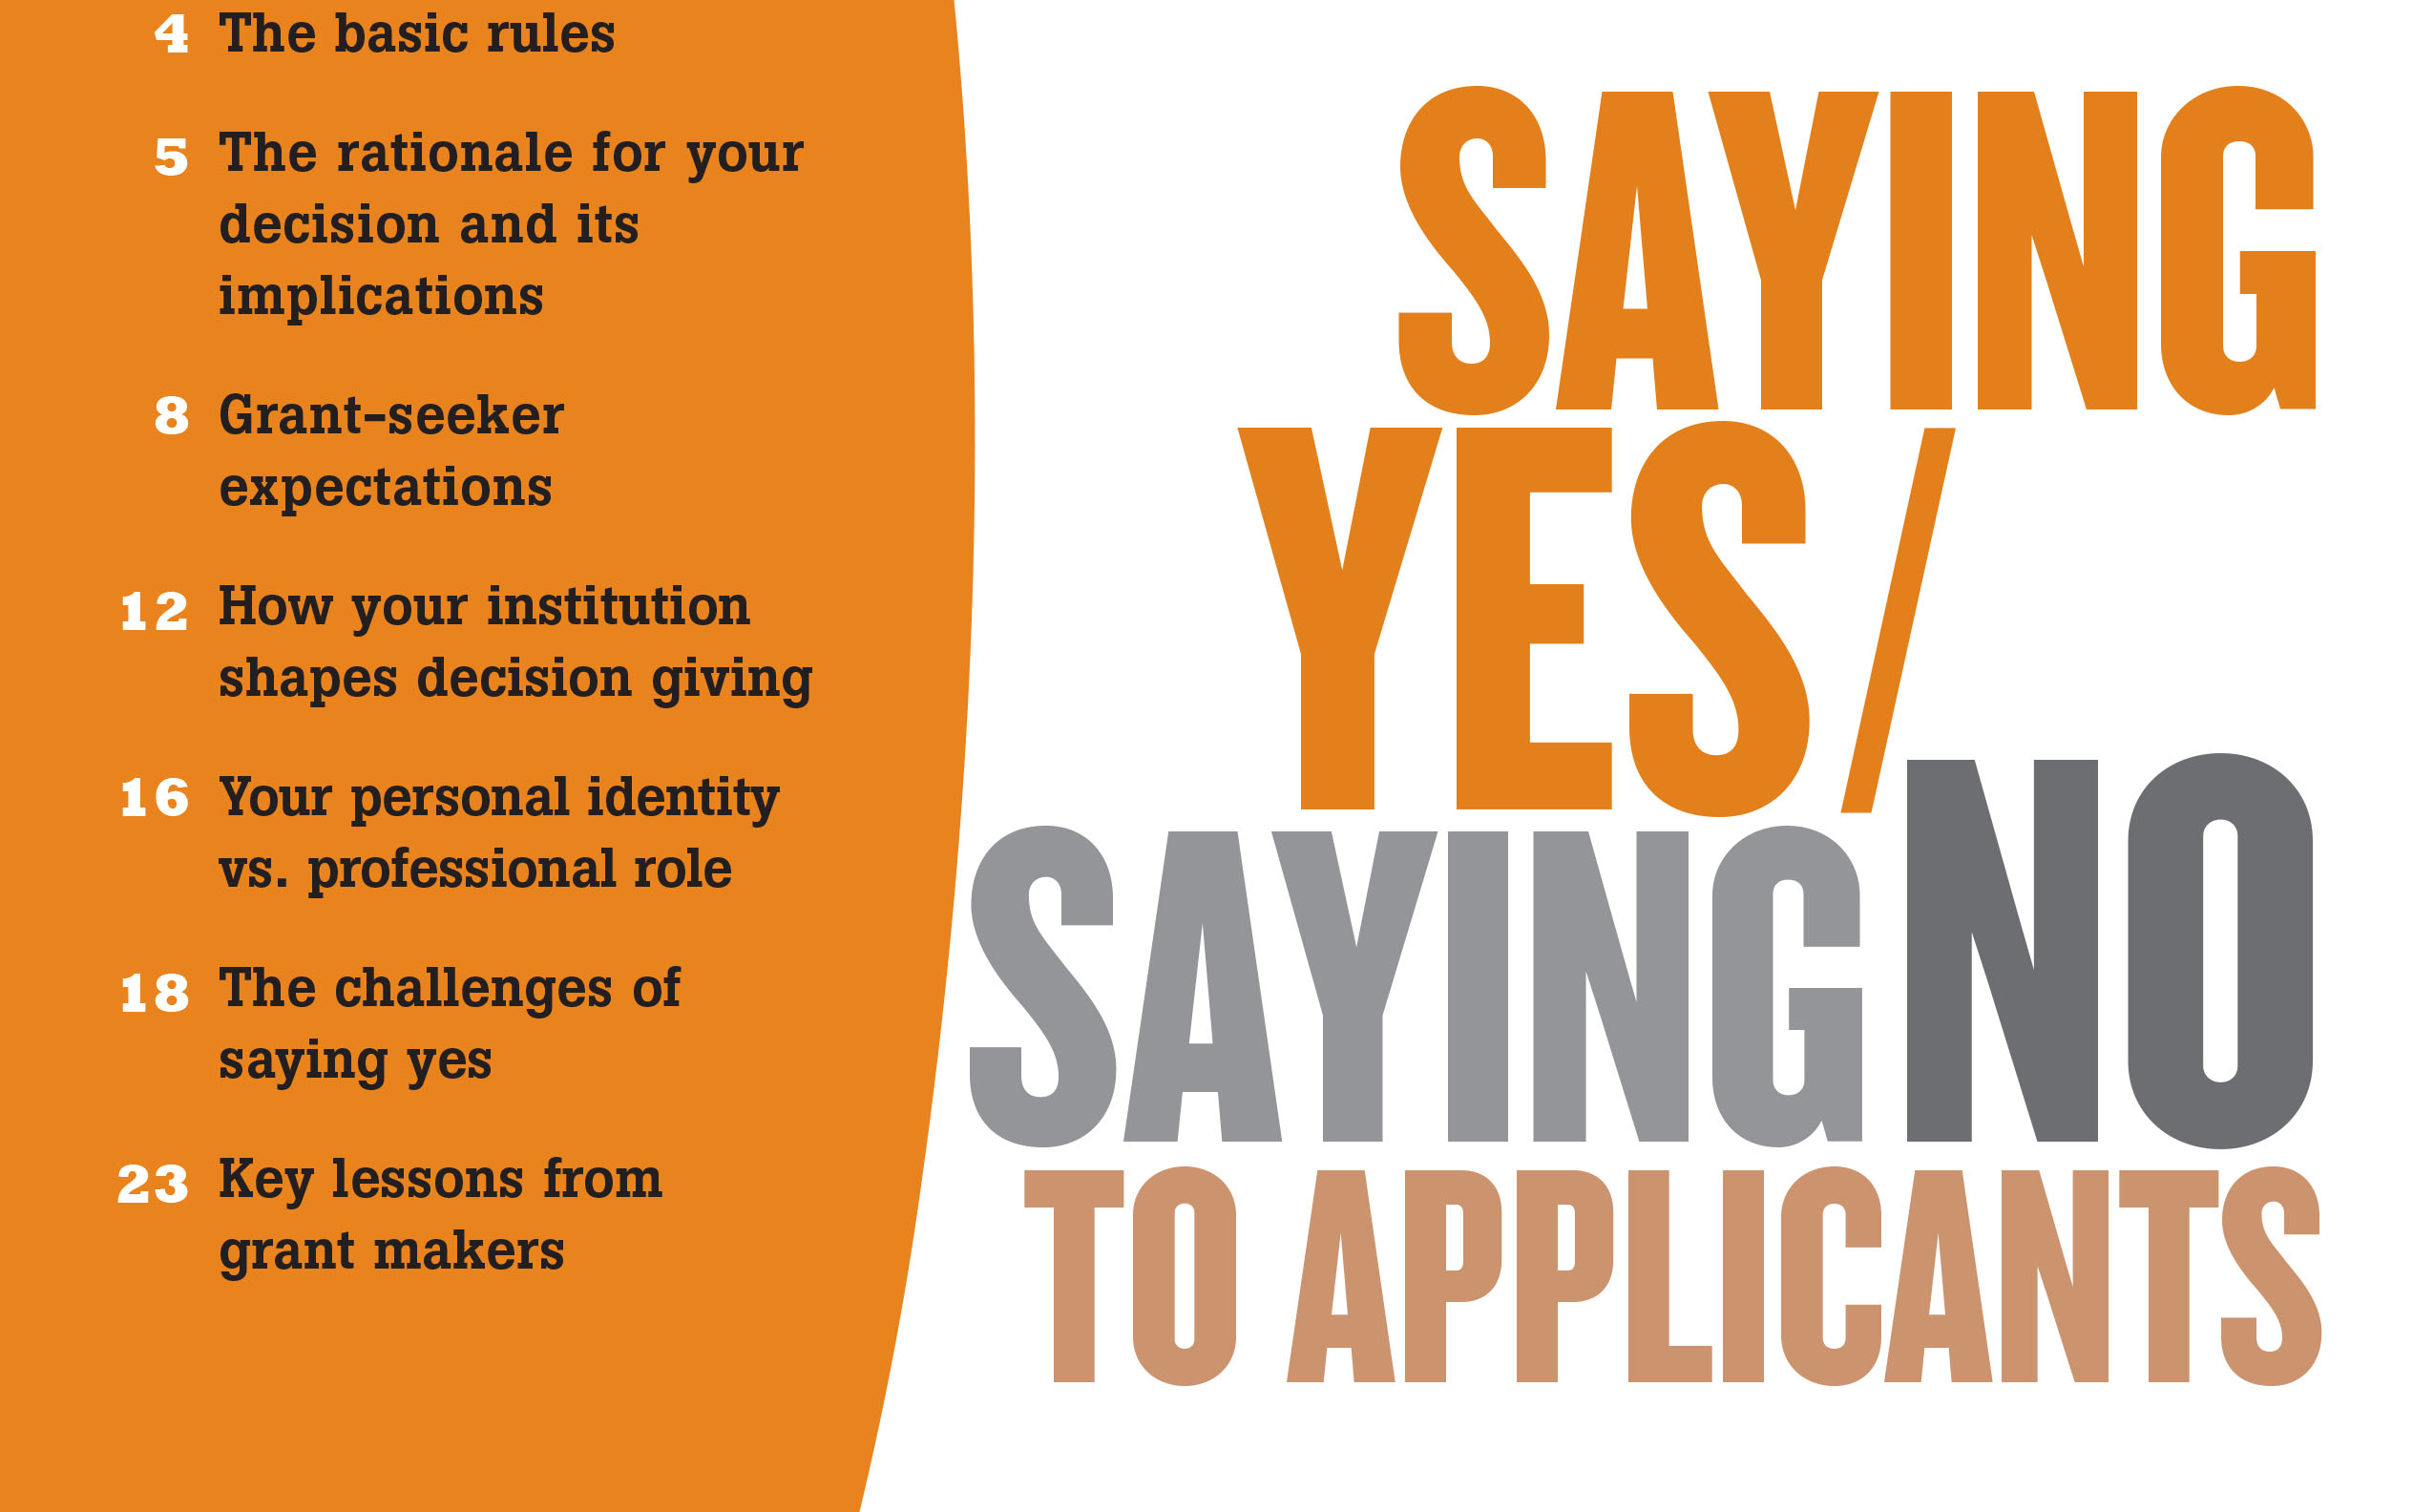 Saying Yes/Saying No to Applicants